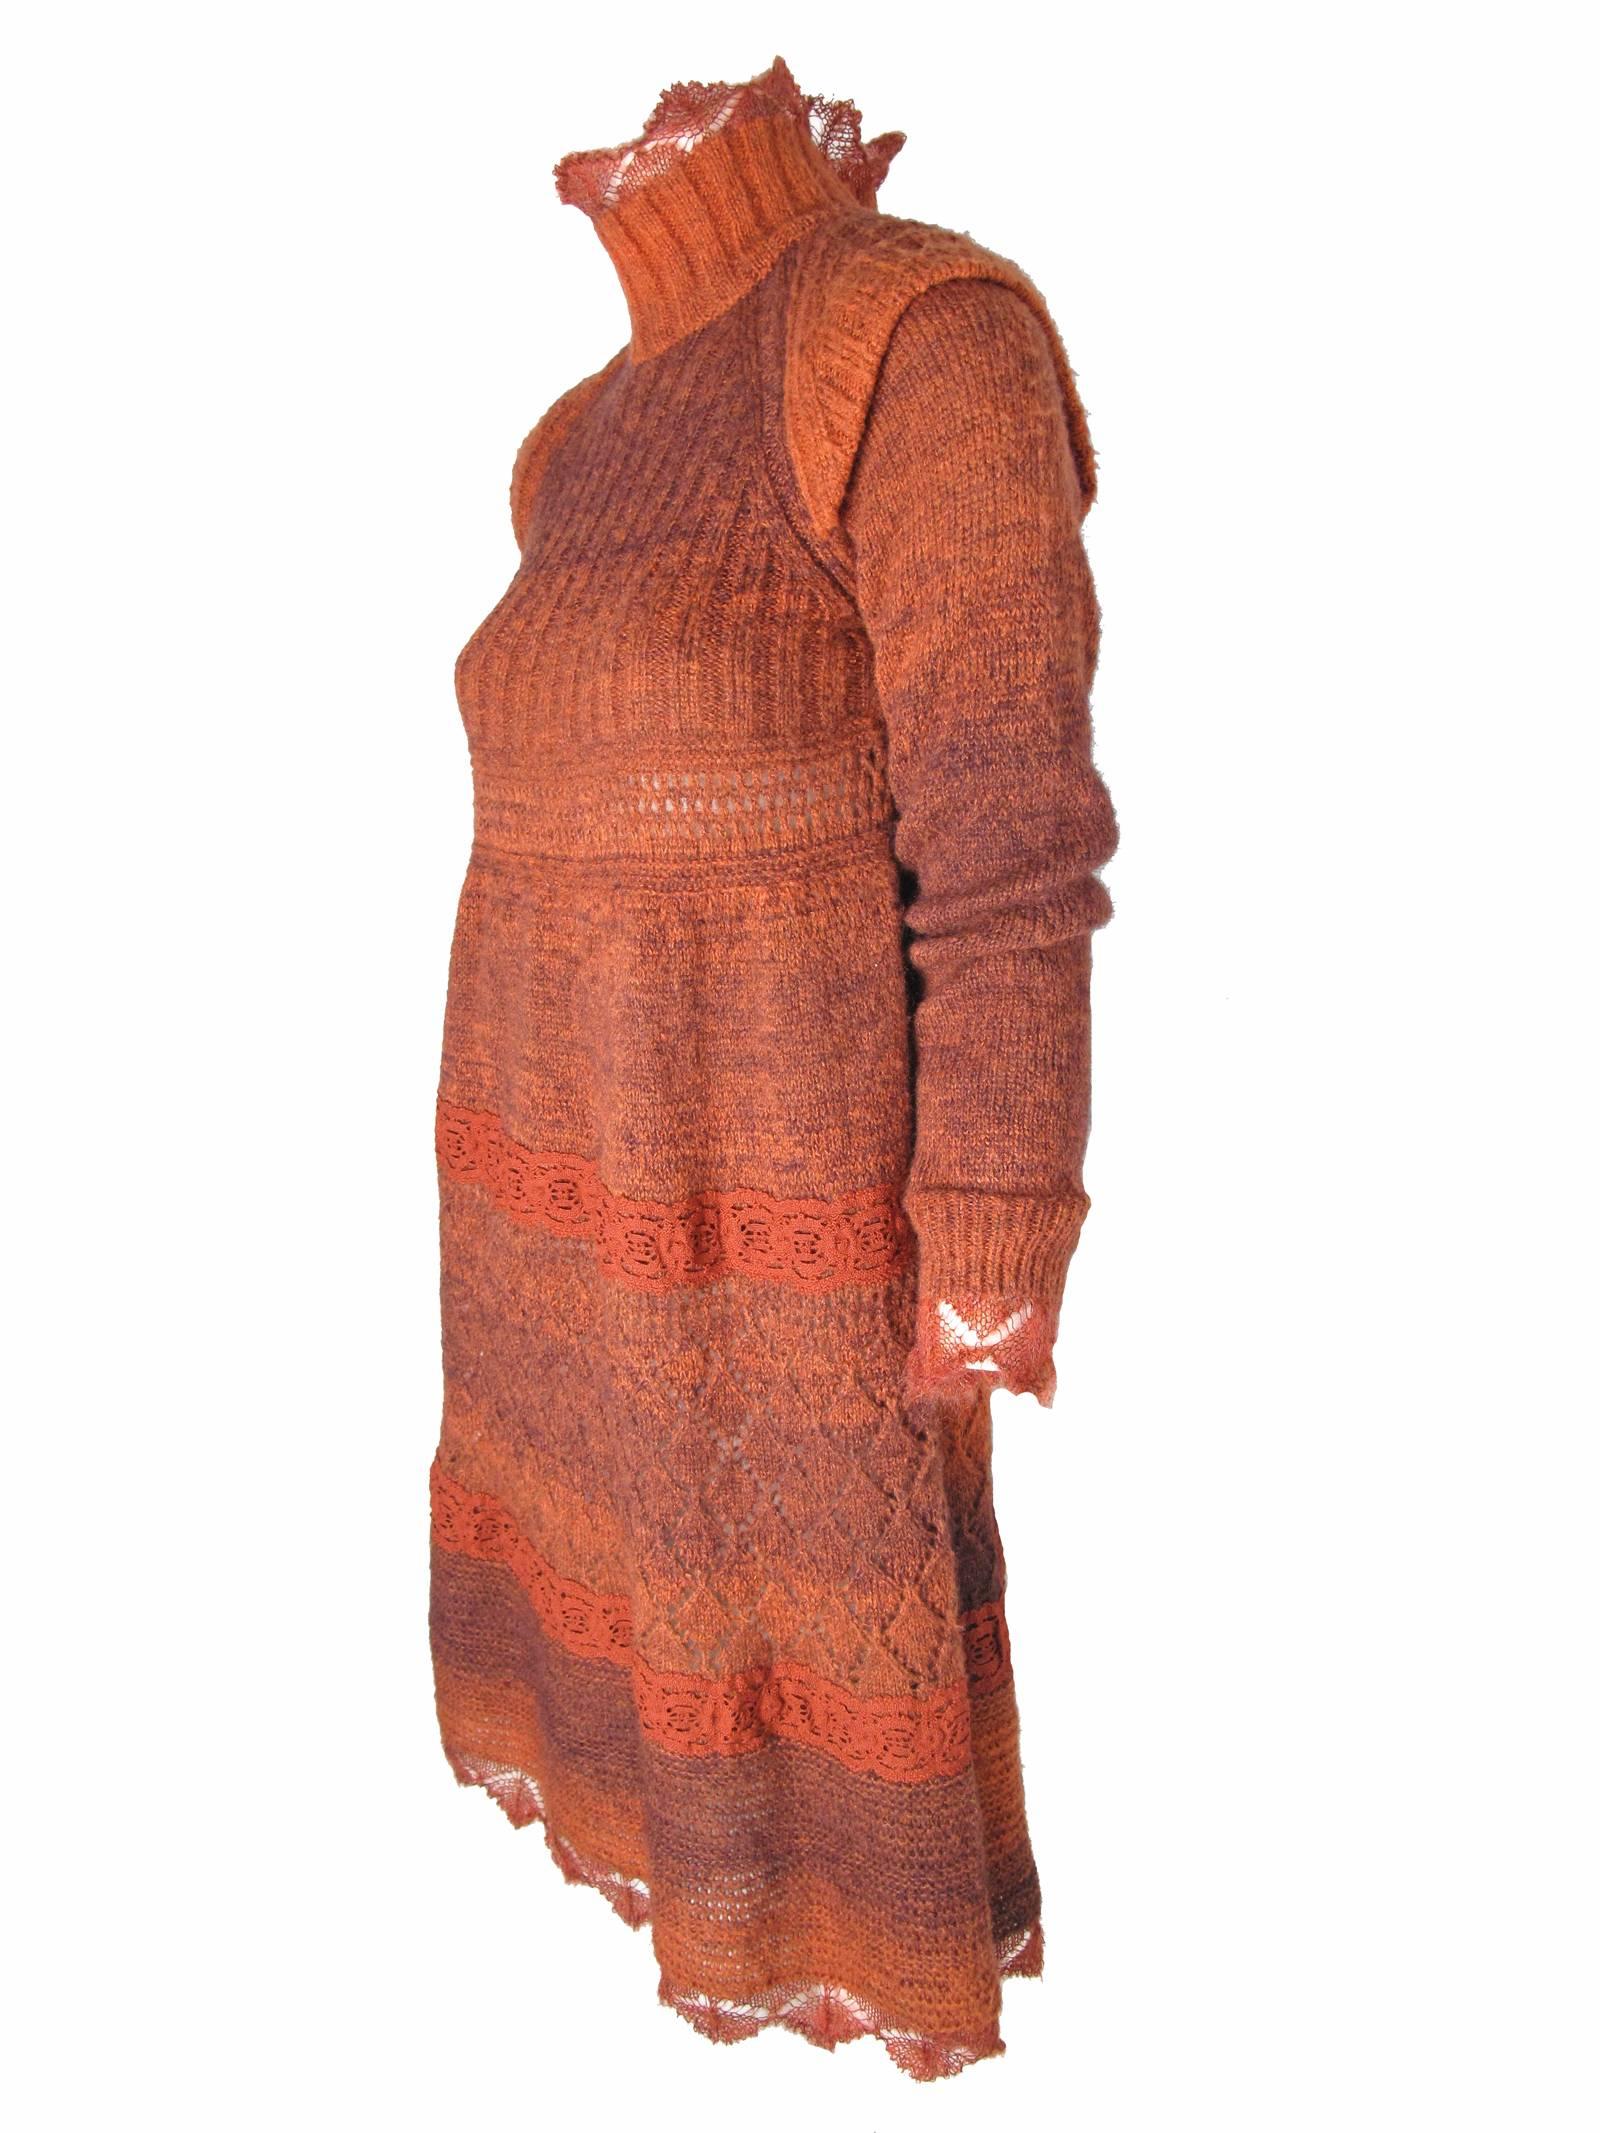 1990s Jean Paul Gaultier rust knit sweater dress with lace.  Interesting shoulder detail.  Condition: Excellent. Size XS

We accept returns for refund, please see our terms.  We offer free ground shipping within the US.  Let us know if you have